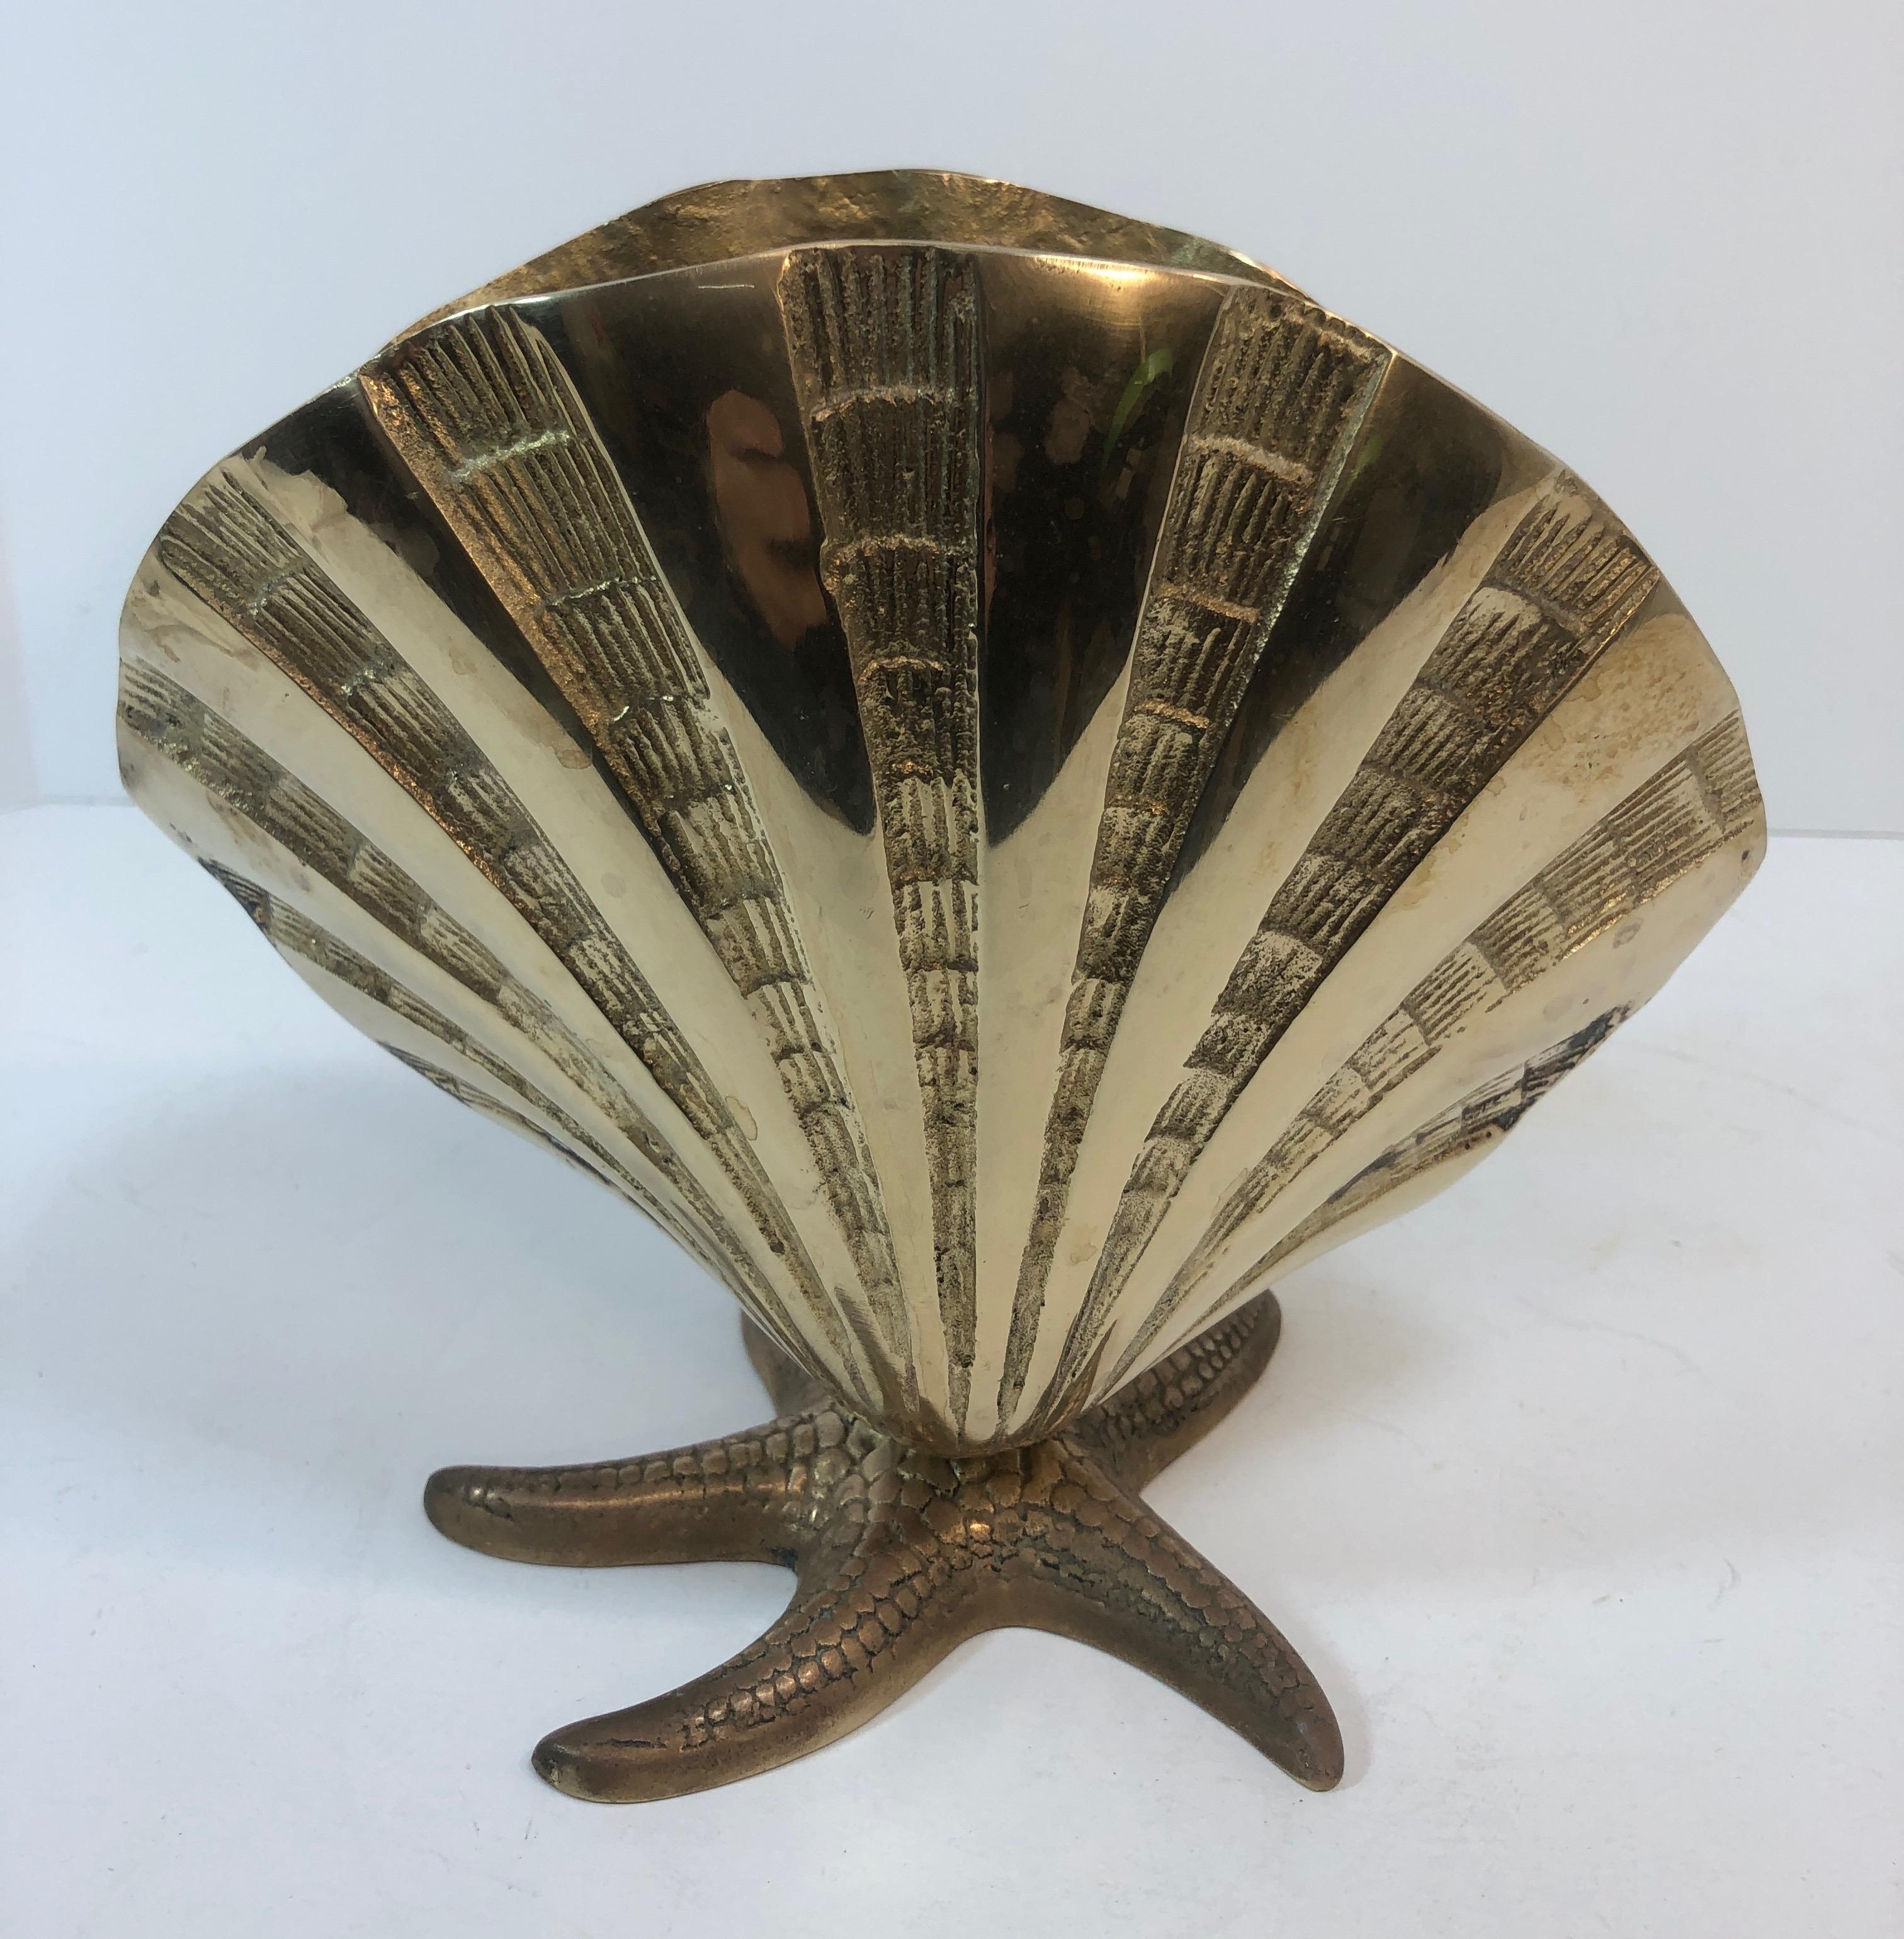 Large brass sea shell on starfish base. Very unusual design with nice detail. Some patina spots but overall nice condition. Ready for your beach house!